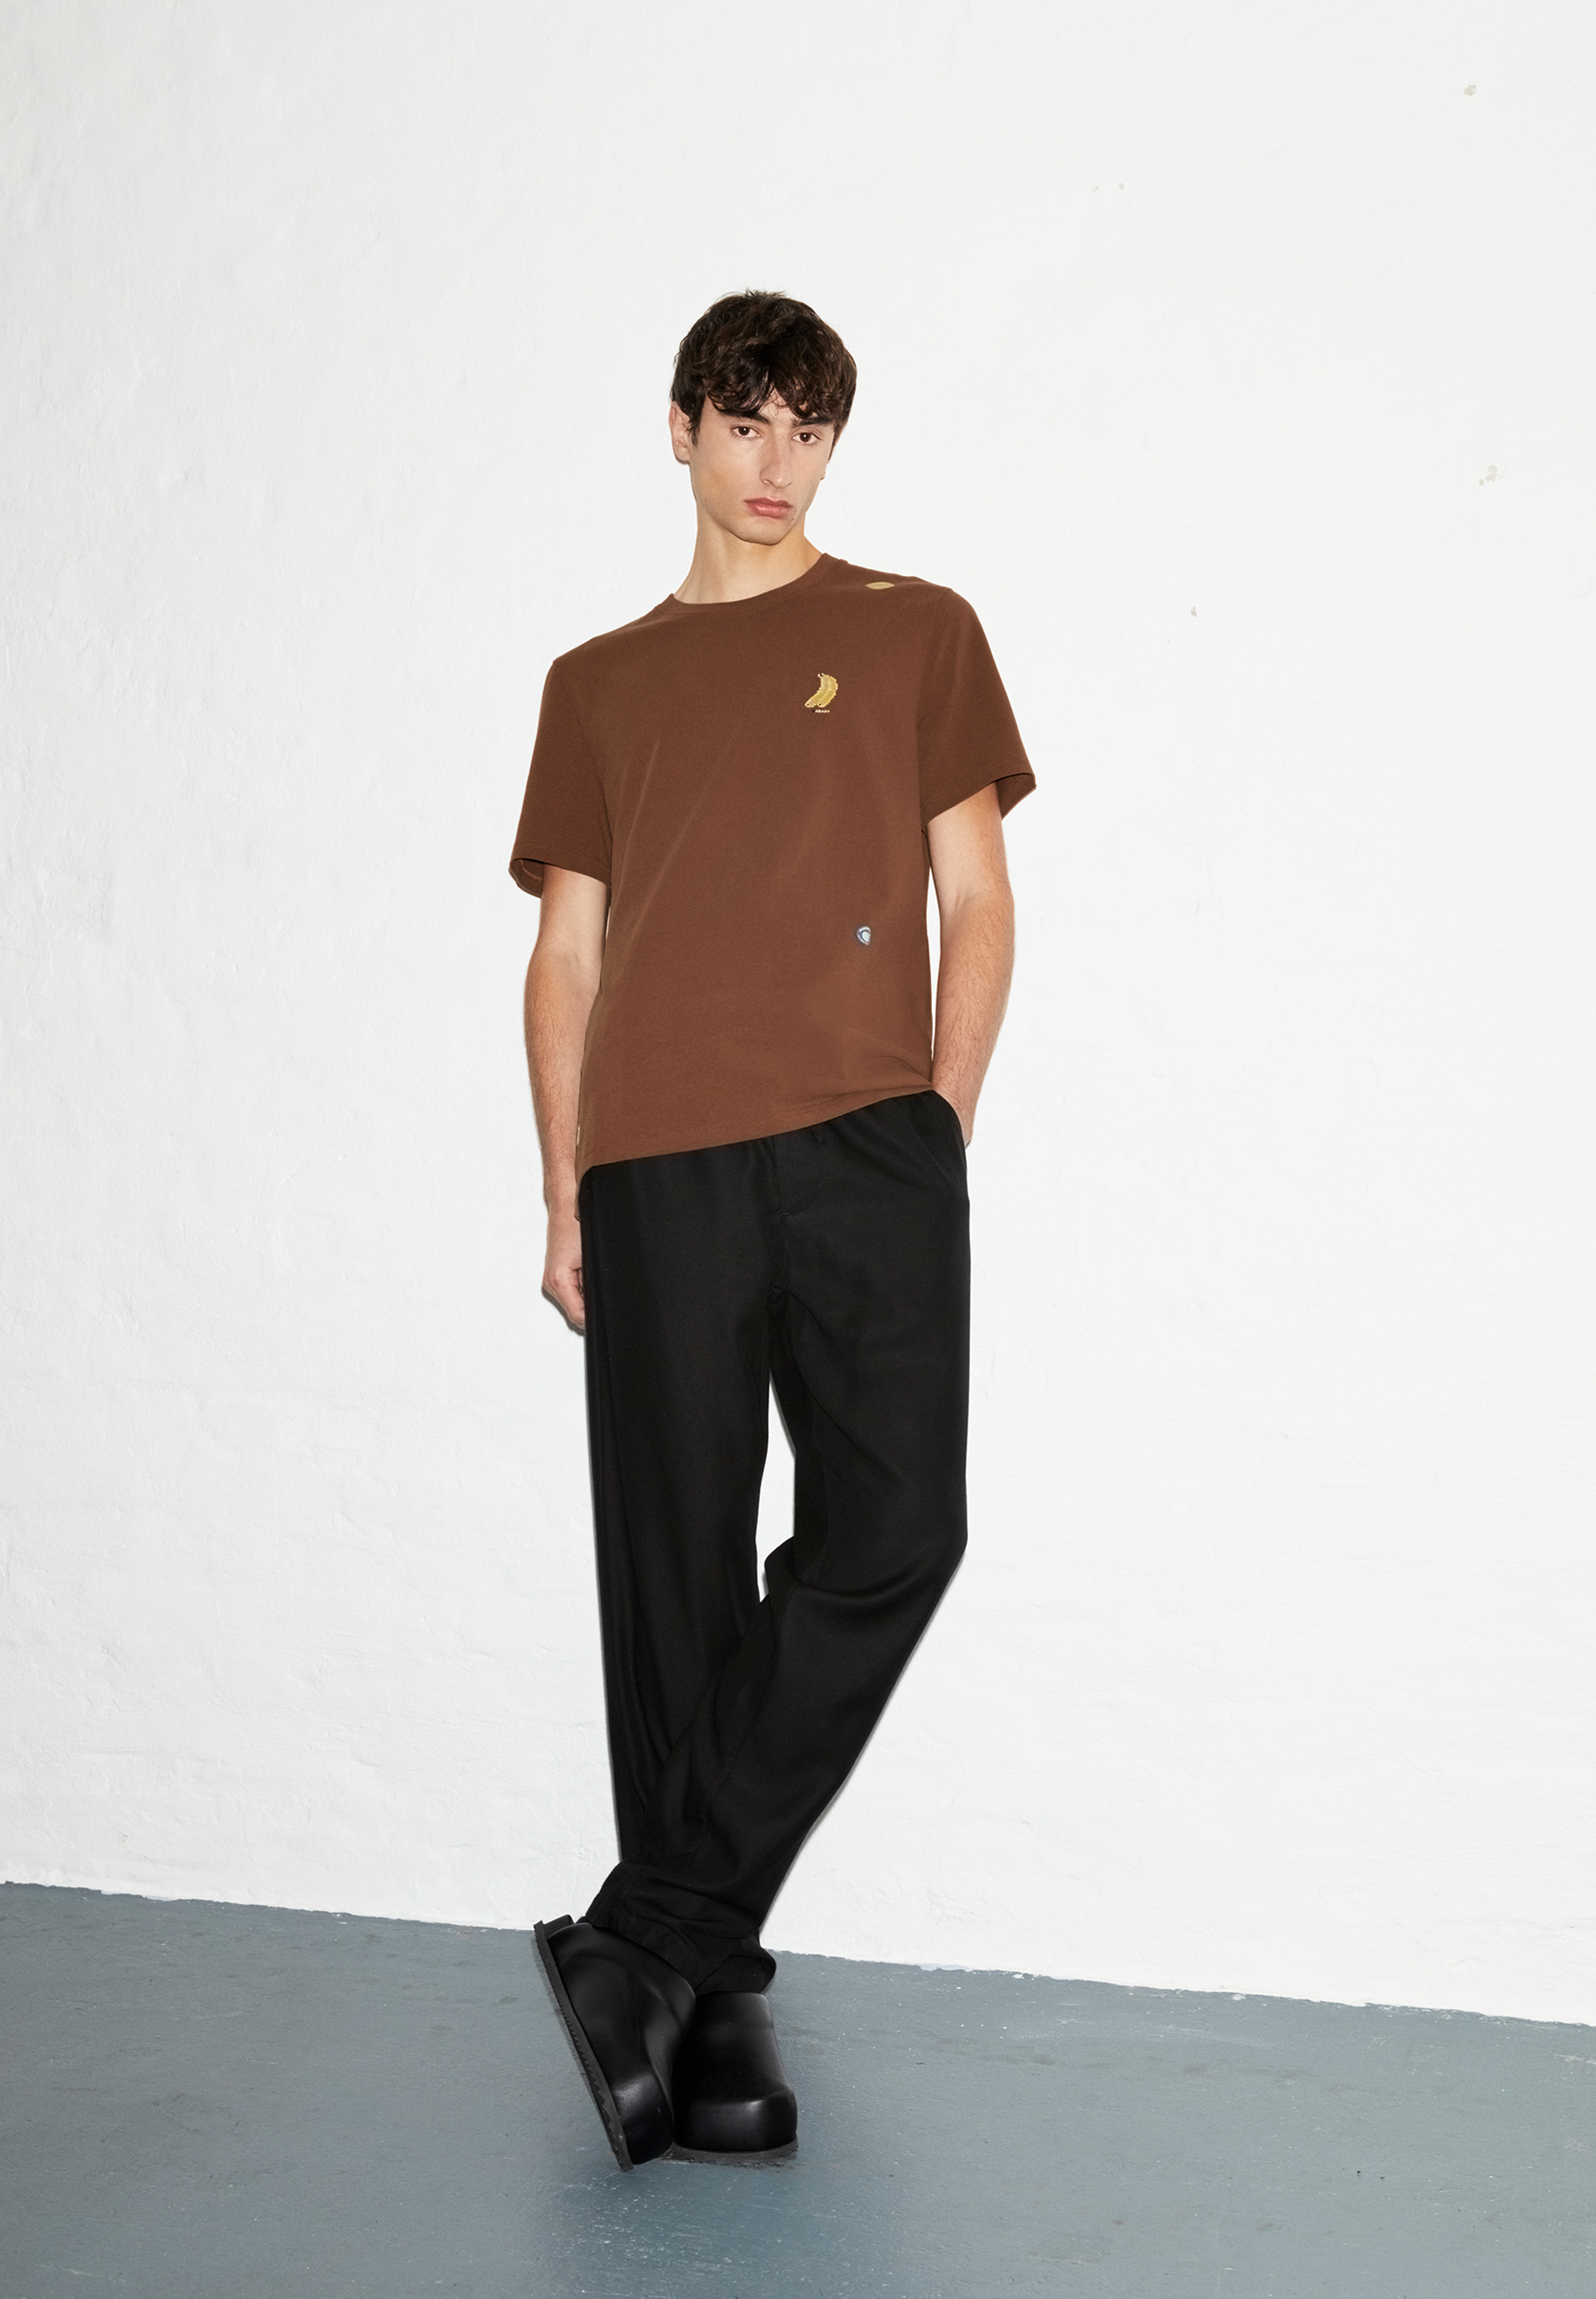 LODAAN PREMIUM BADGES Heavyweight T-Shirt Relaxed Fit made of Organic Cotton Mix